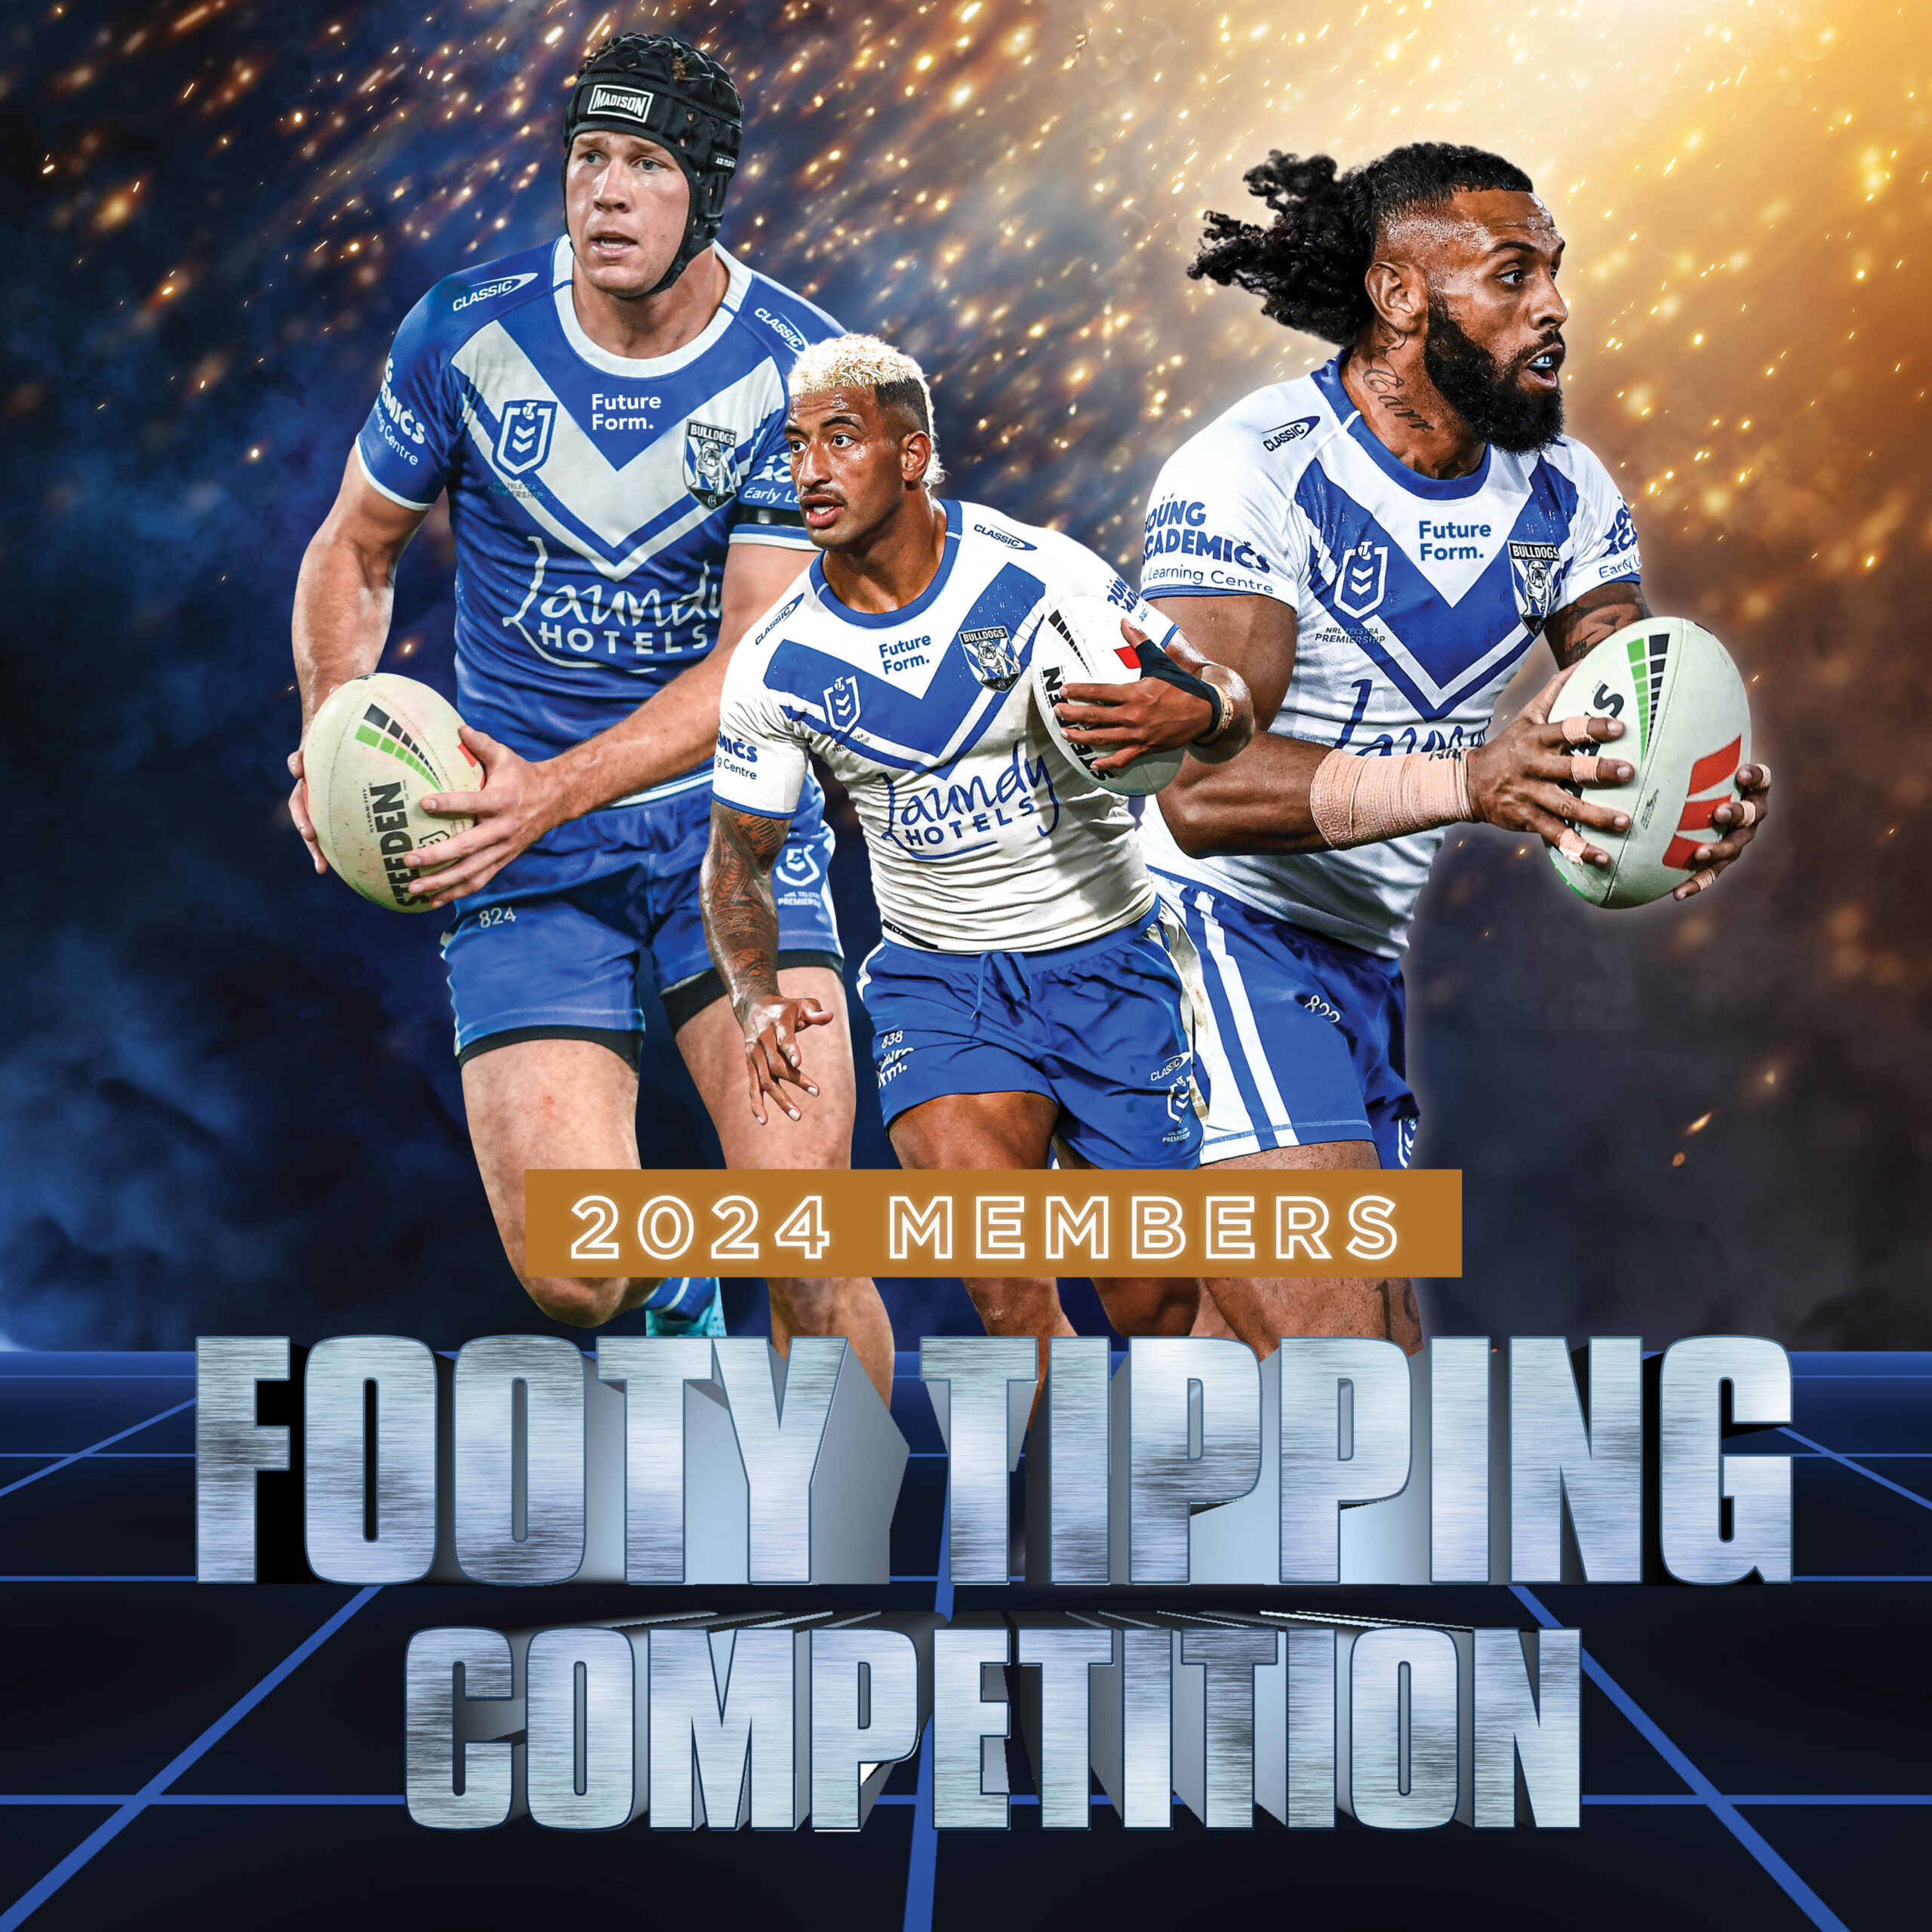 Footy Tipping Competition 2024